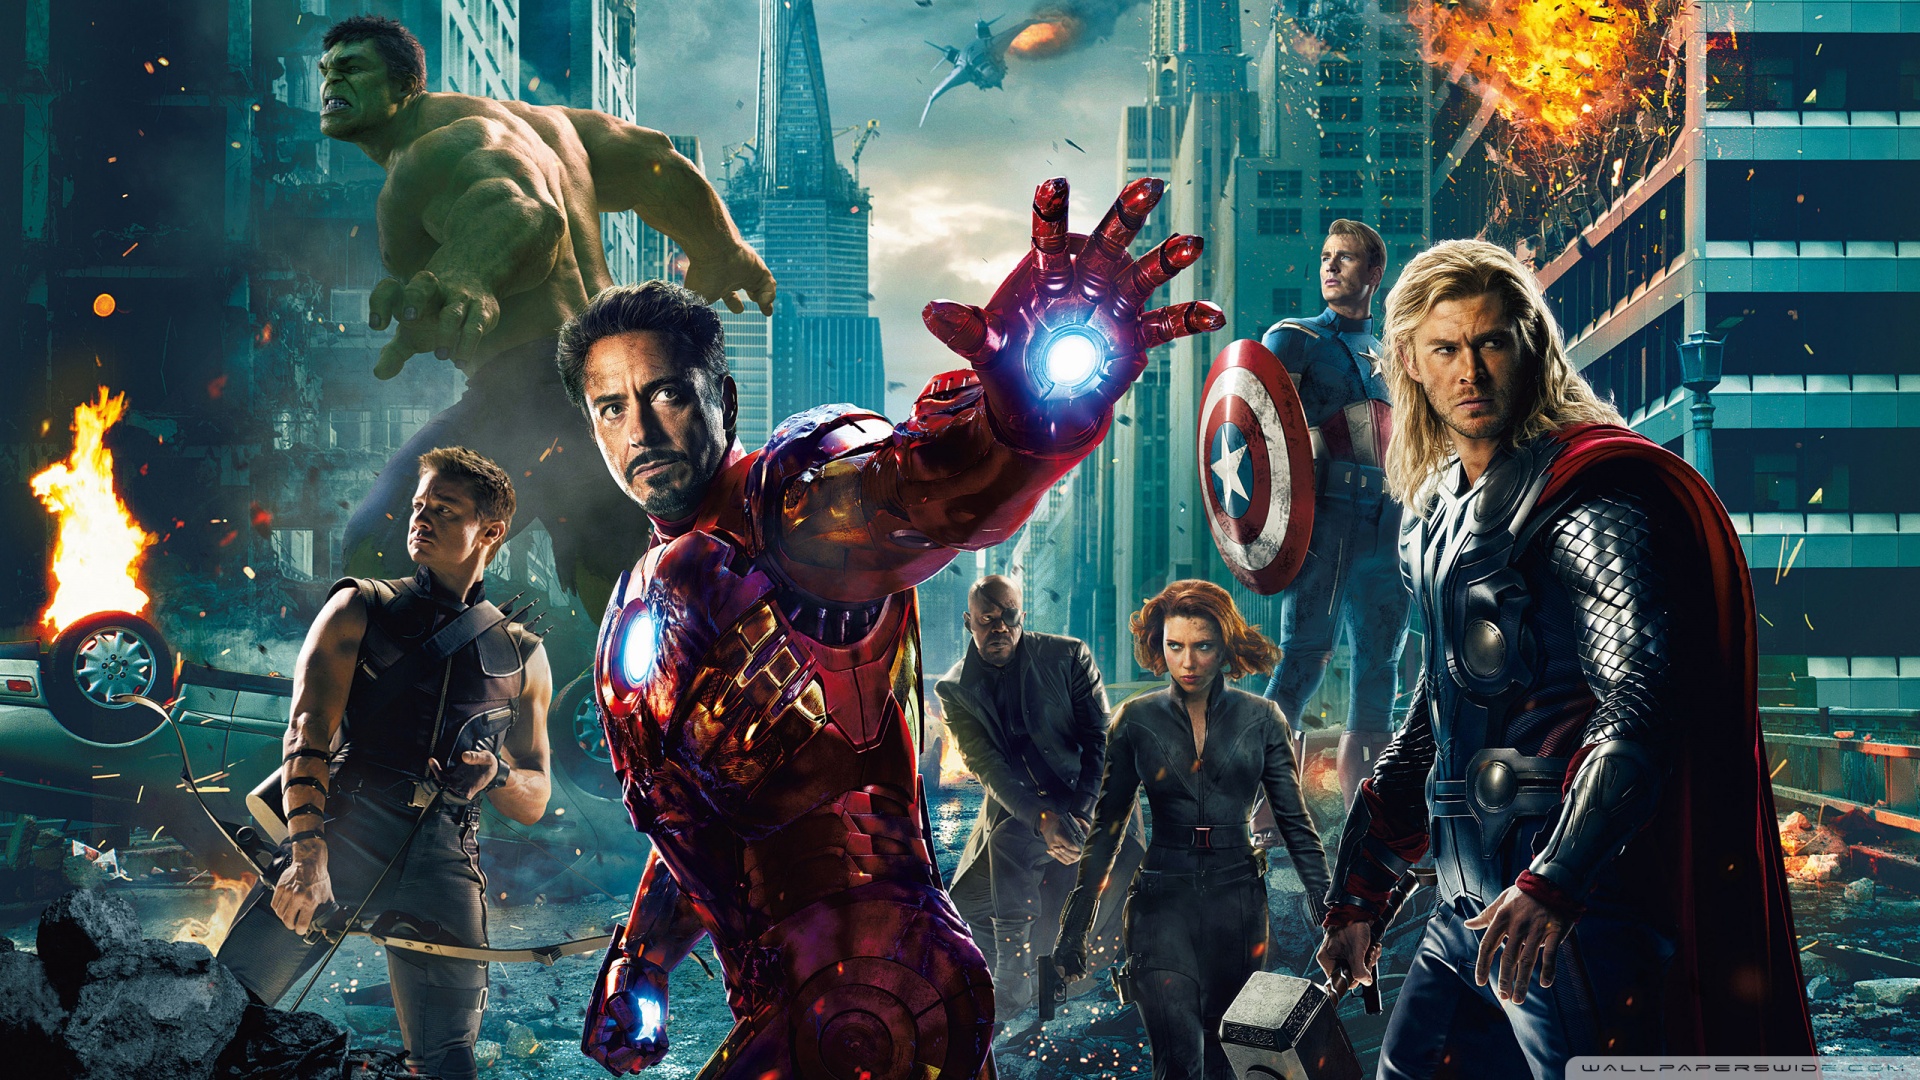 Marvel Live Action Movies Image The Avengers HD Wallpaper And